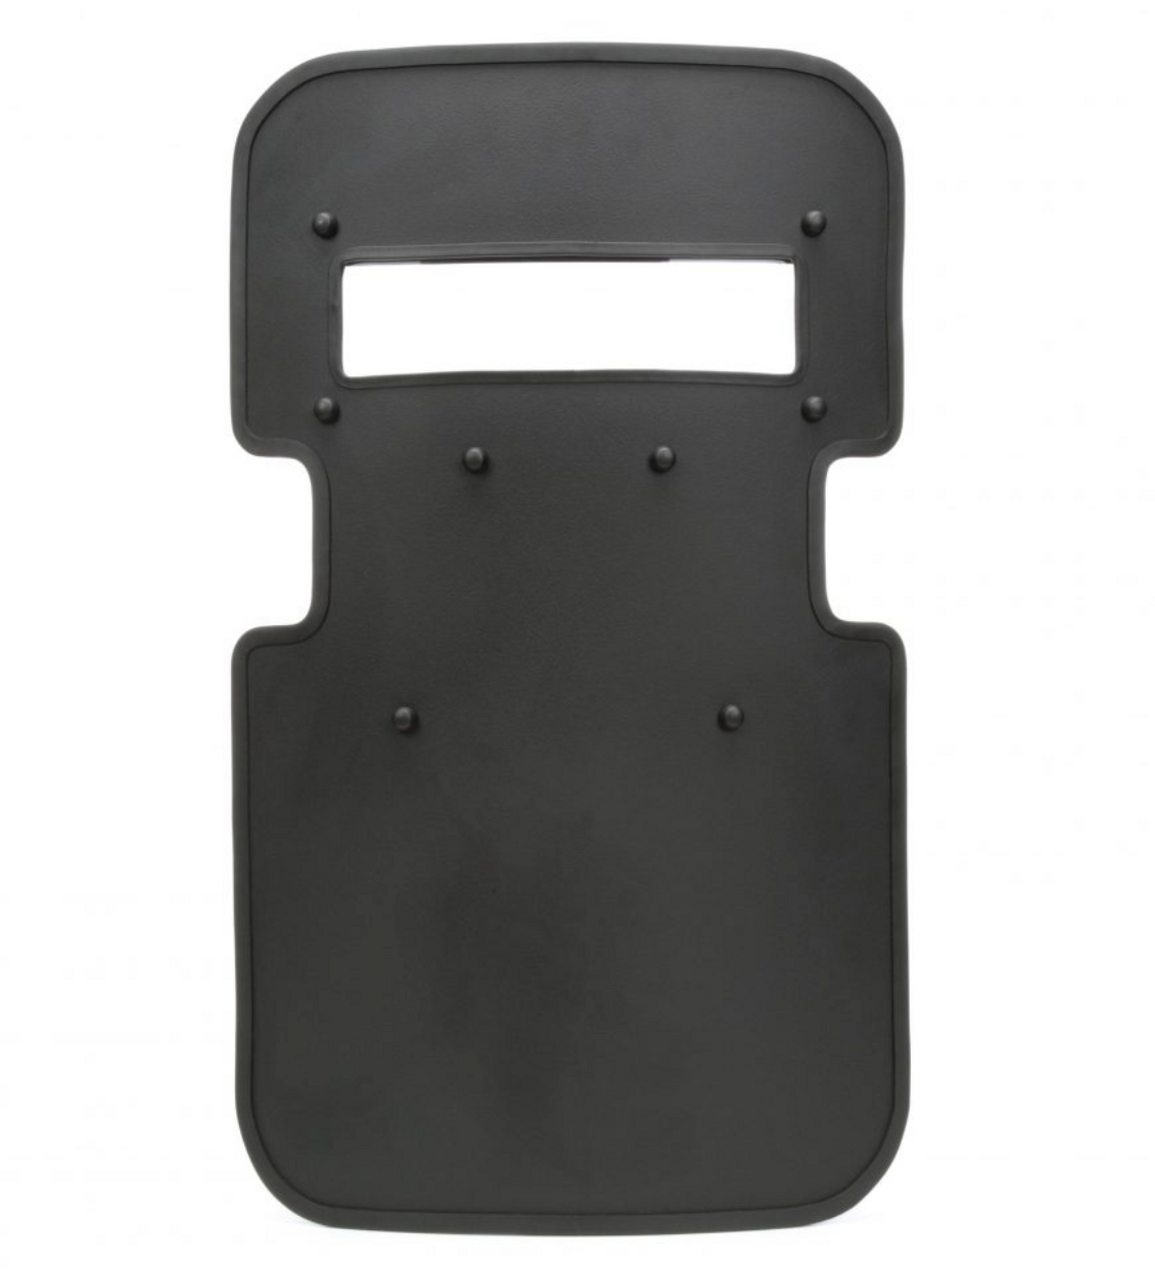 United Shield Assault Ballistic Shield, NIJ Level IIIA Protection, Standard 4" x 16" Viewport, Optional Led light, NY tri-grip handle, Dual Circular Arm cut out, for Military and Law Enforcement